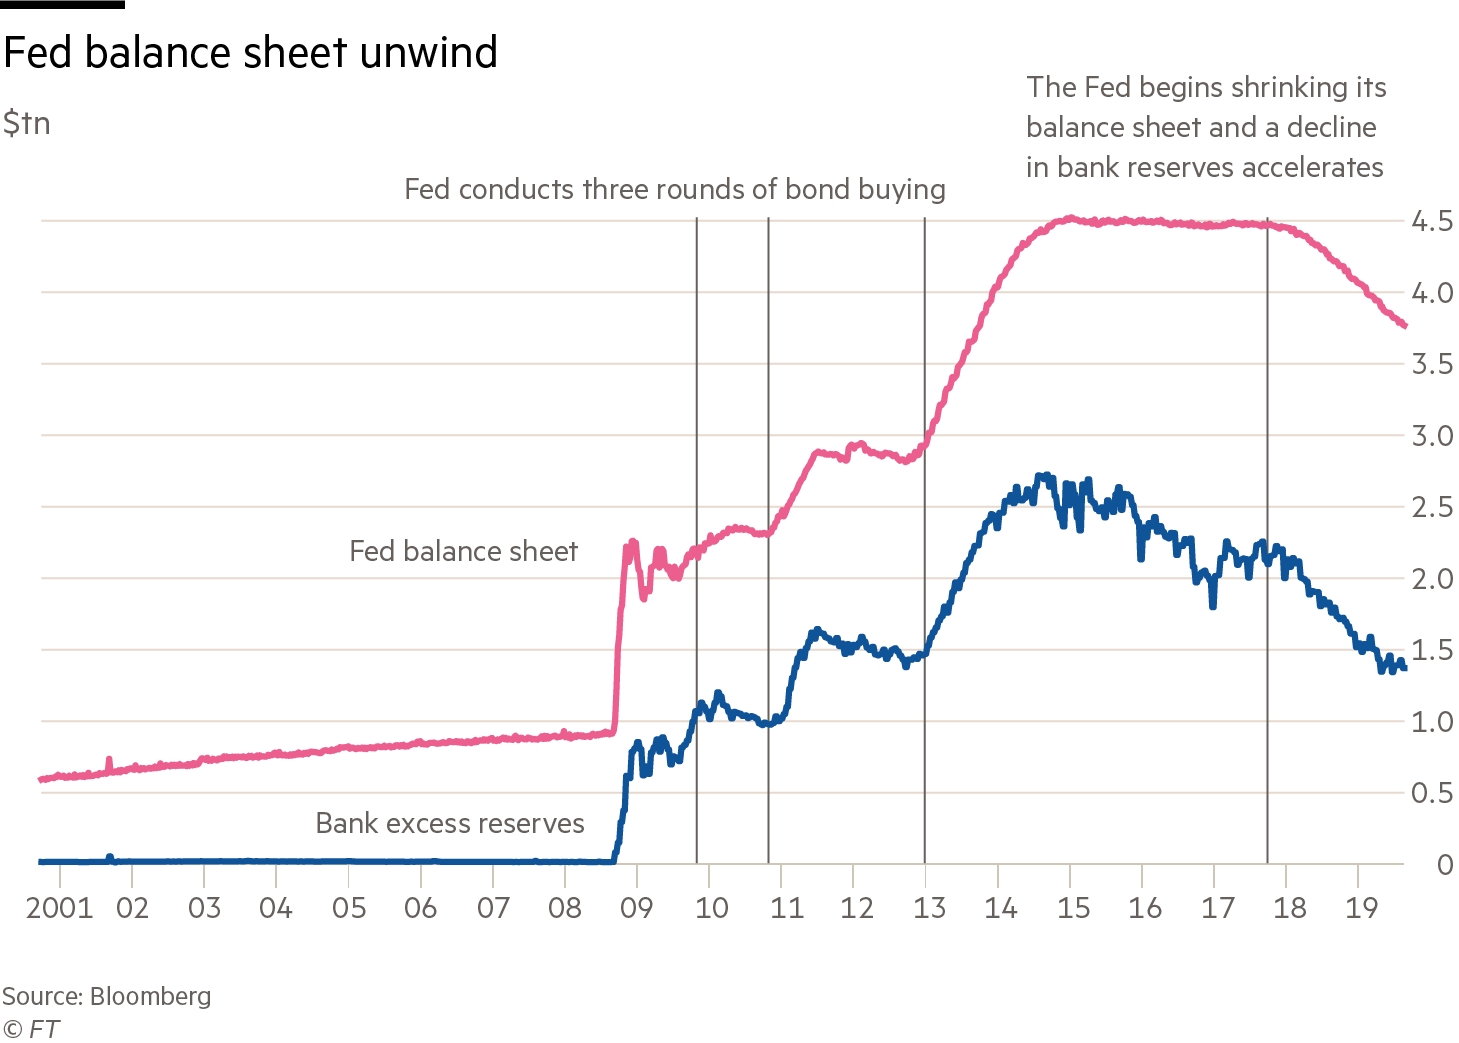 Line chart showing the Fed balance sheet and bank excess reserves between 2001 and 2019